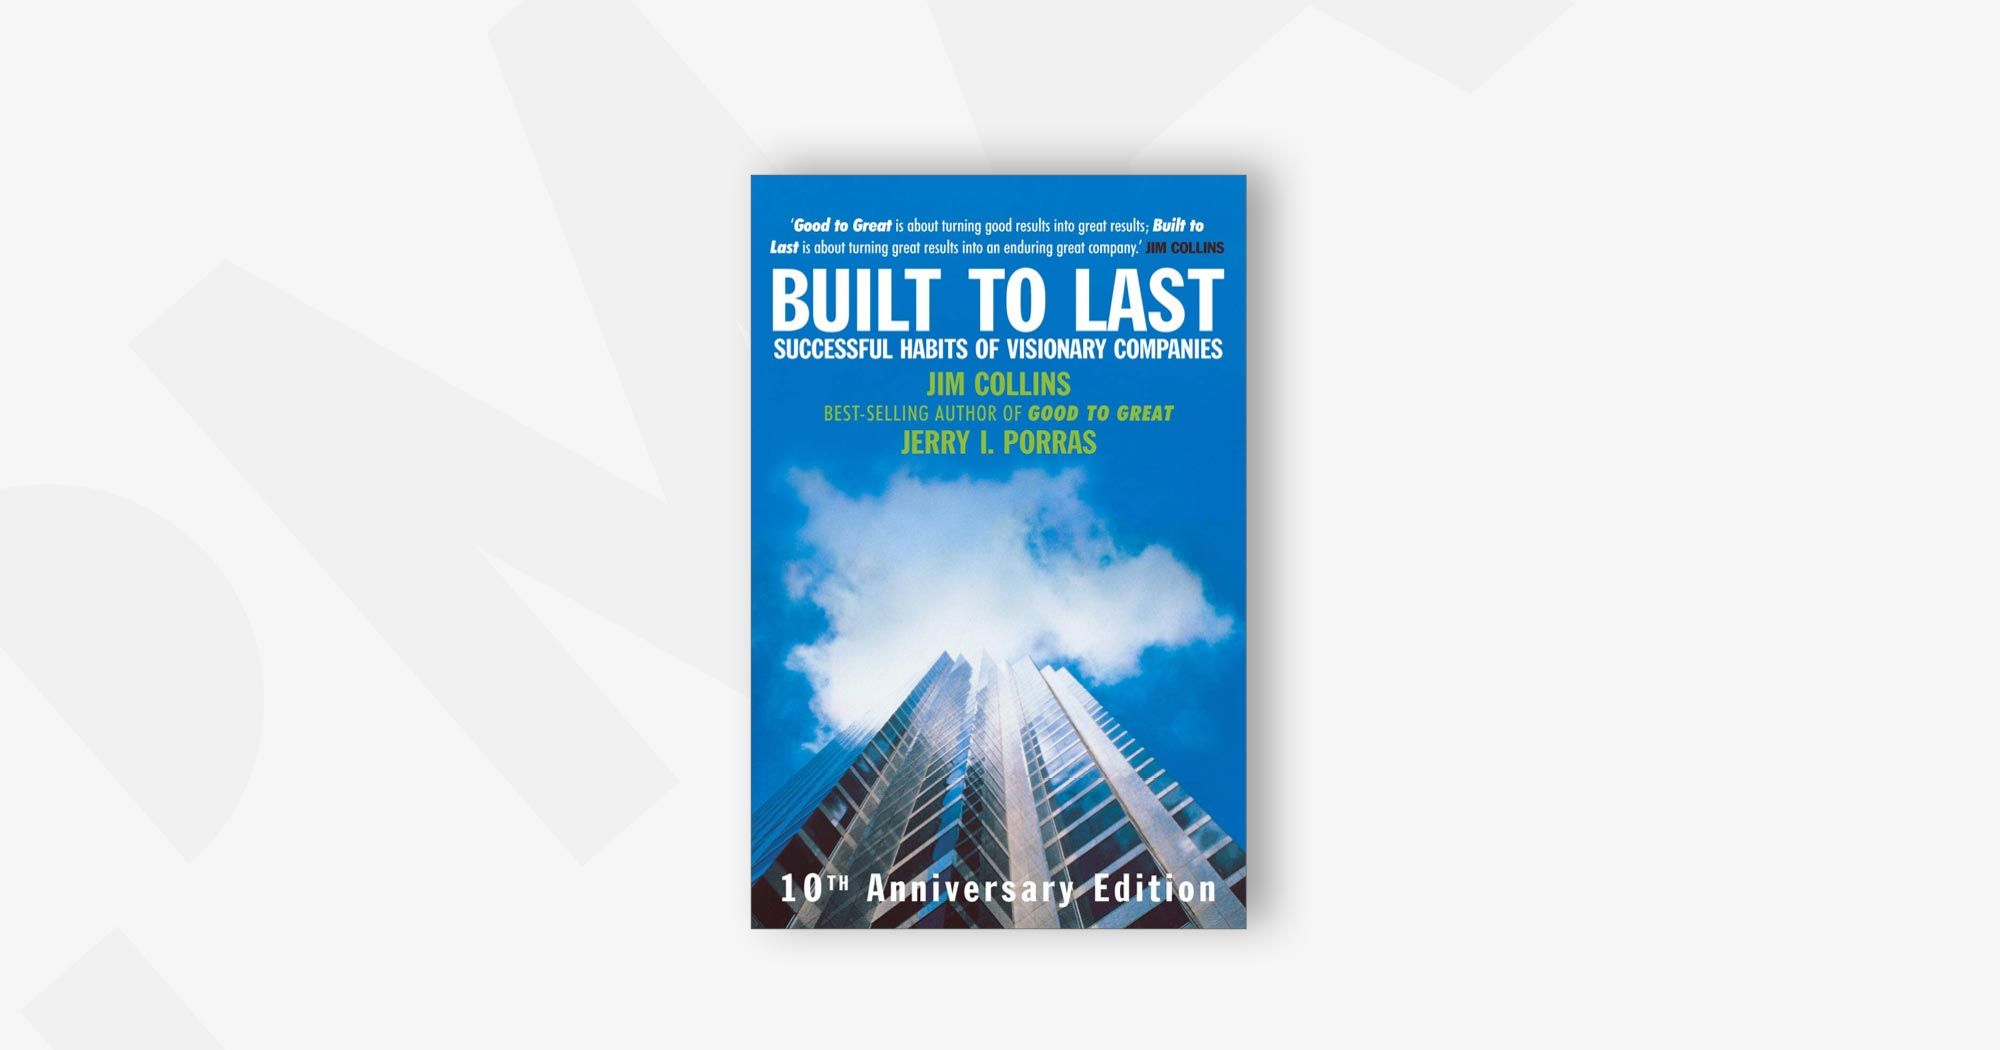 Built to Last: Successful Habits of Visionary Companies – Jim Collins